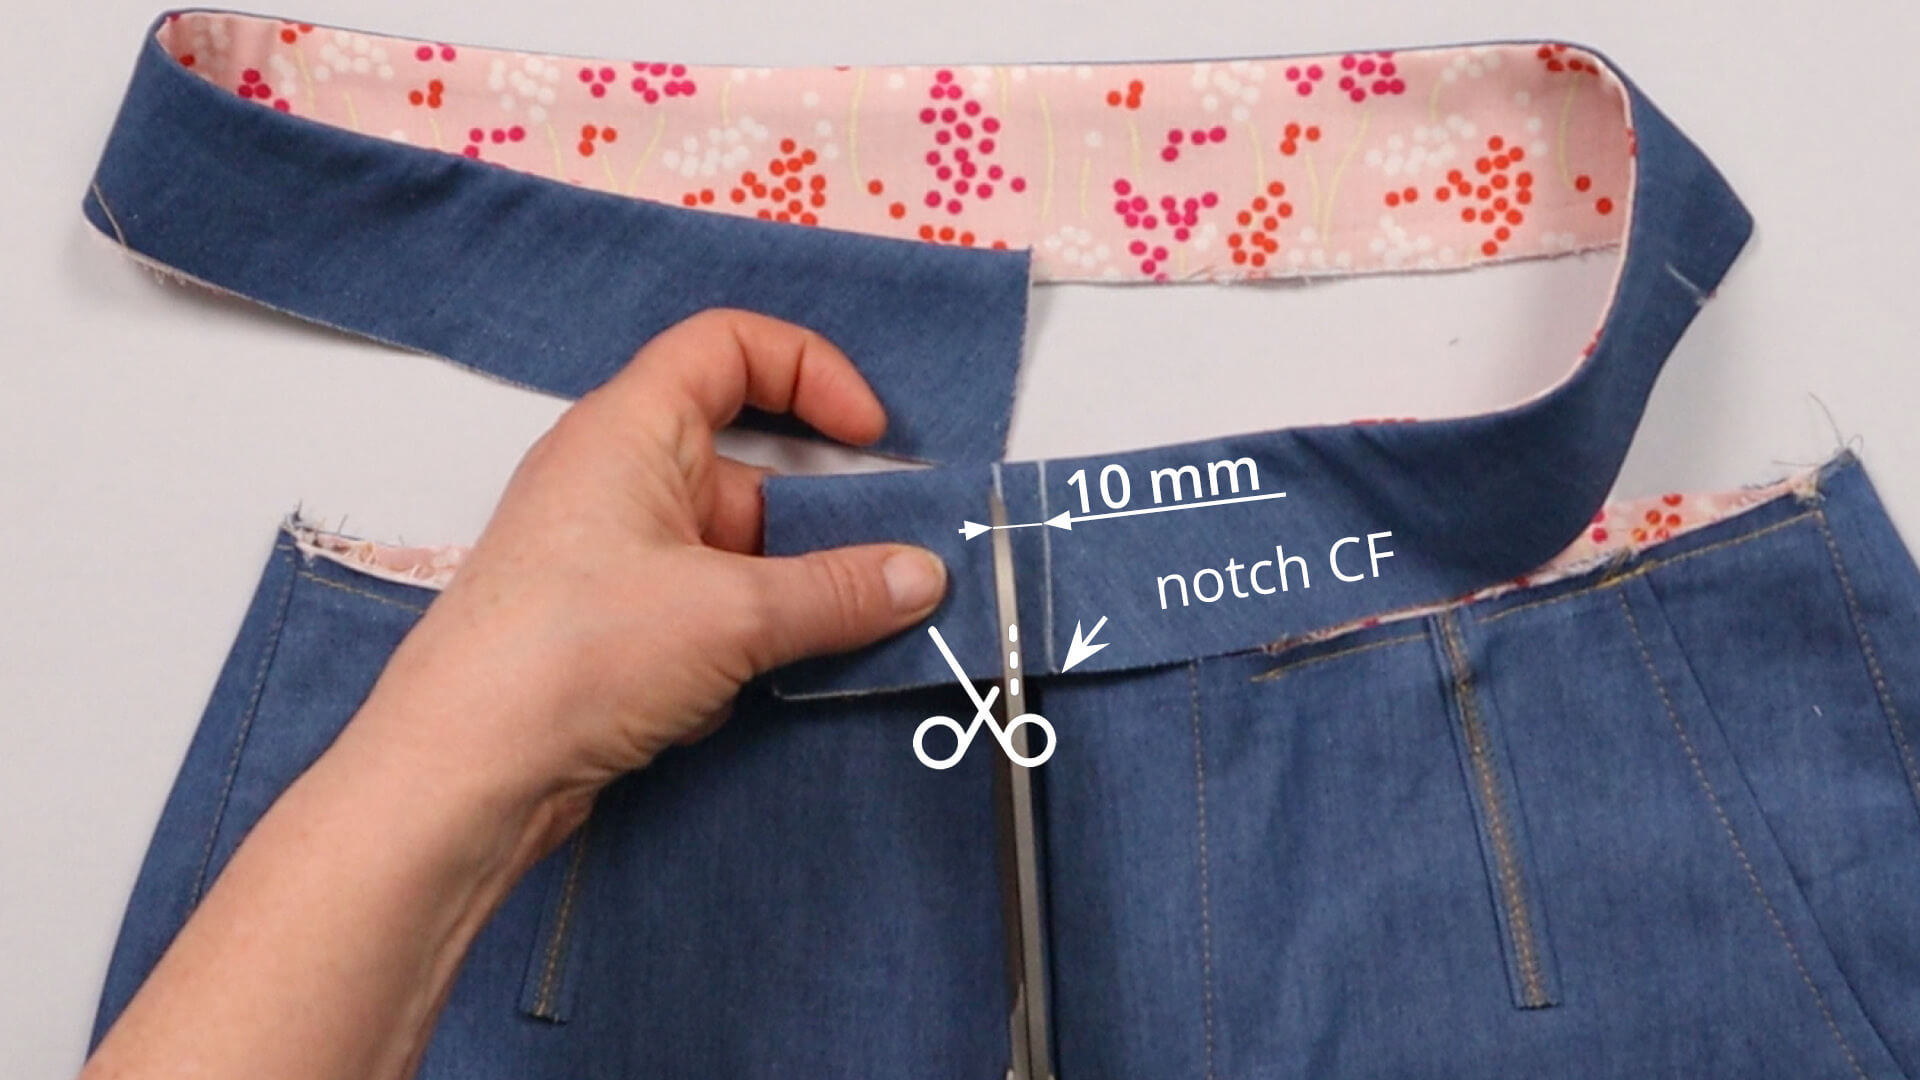 The picture shows where the left side of the waistband can be shortened.